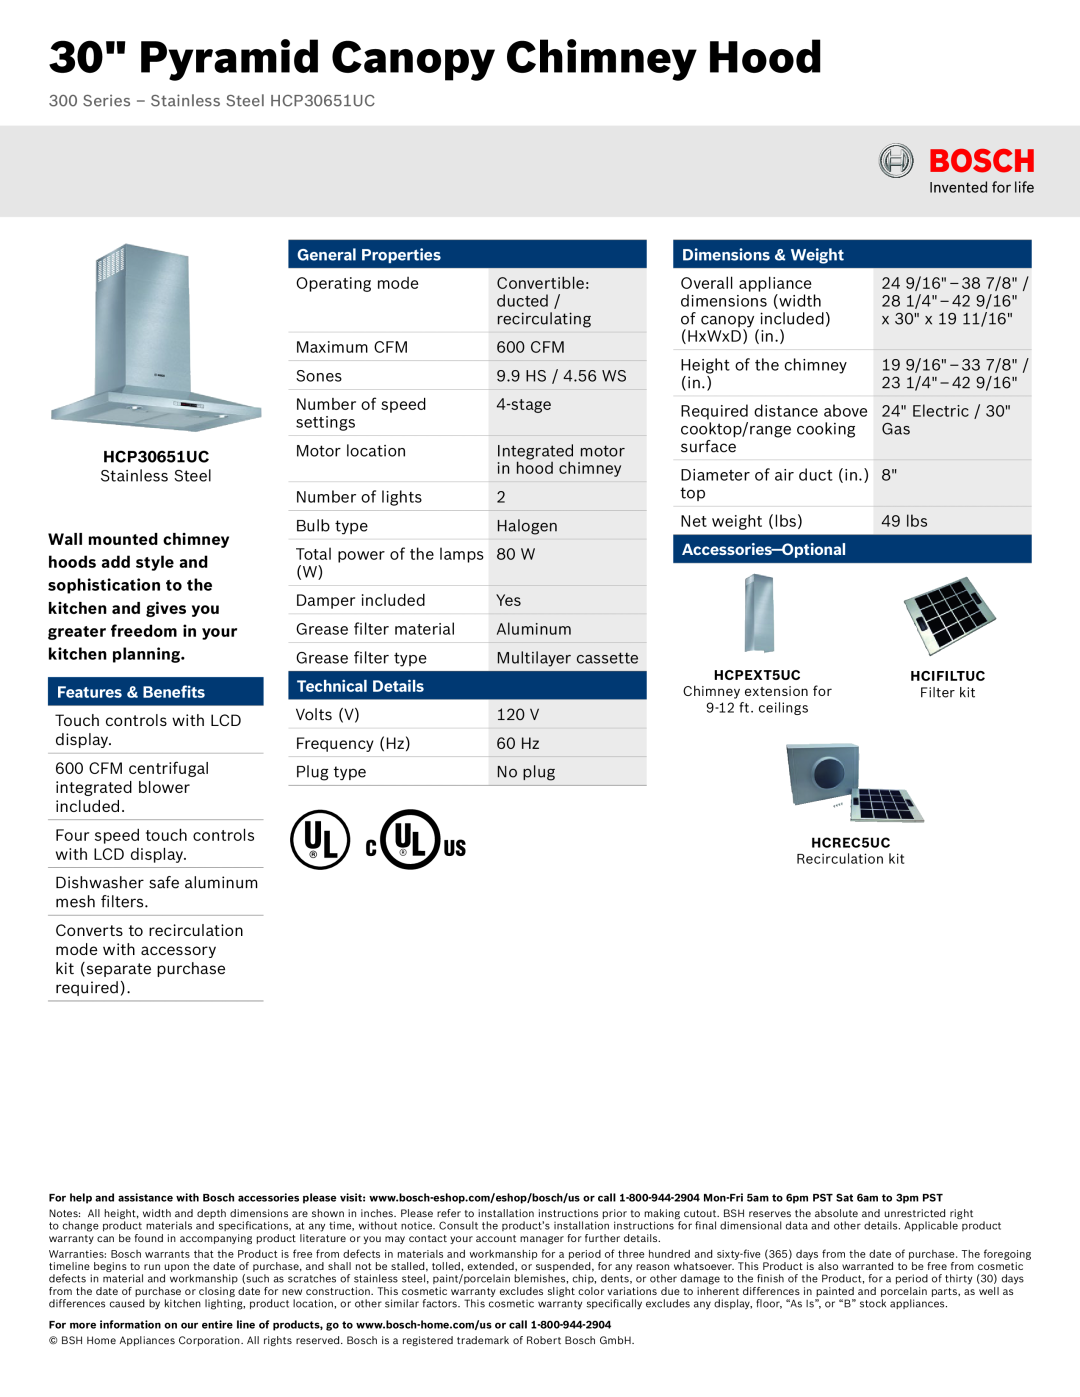 Bosch Appliances dimensions Pyramid Canopy Chimney Hood, Series – Stainless Steel HCP30651UC, Features & Benefits 